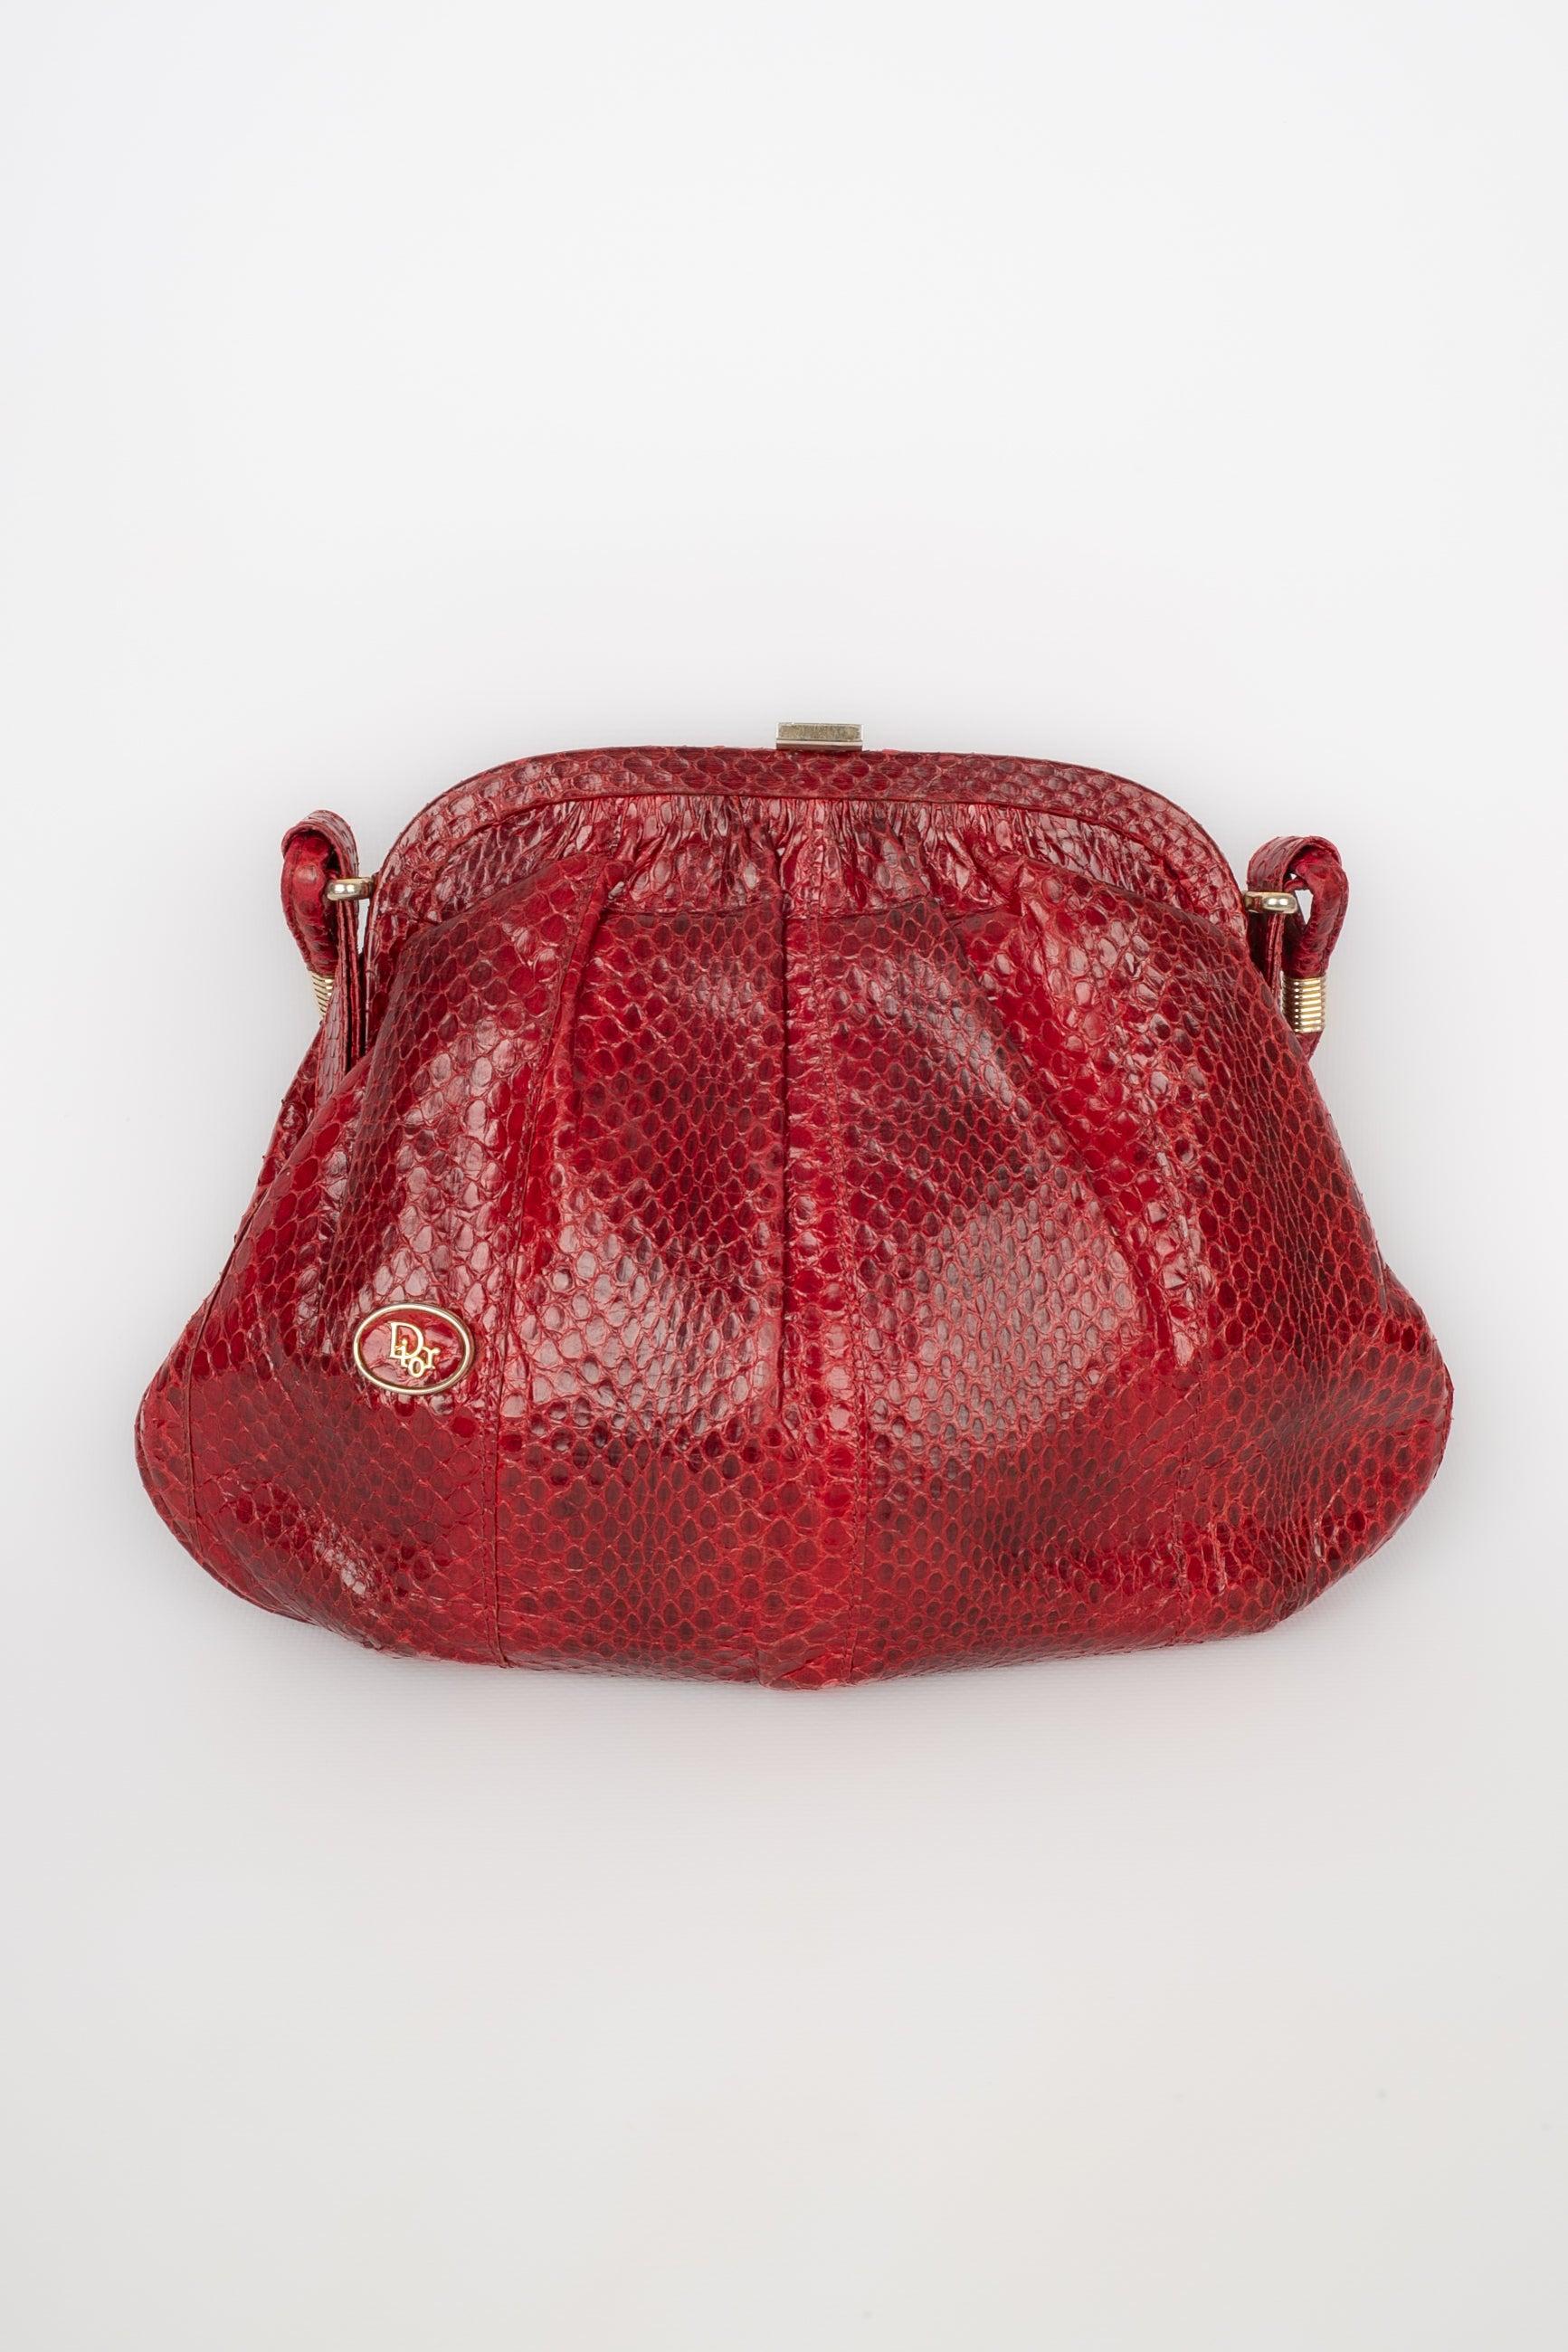 Dior - Red exotic leather bag with golden metal elements. To be mentioned, there is a smell.

Additional information:
Condition: Good condition
Dimensions: Height: 18 cm - Length: 27 cm - Depth: 6 cm - Handle: 88 cm

Seller Reference: S143